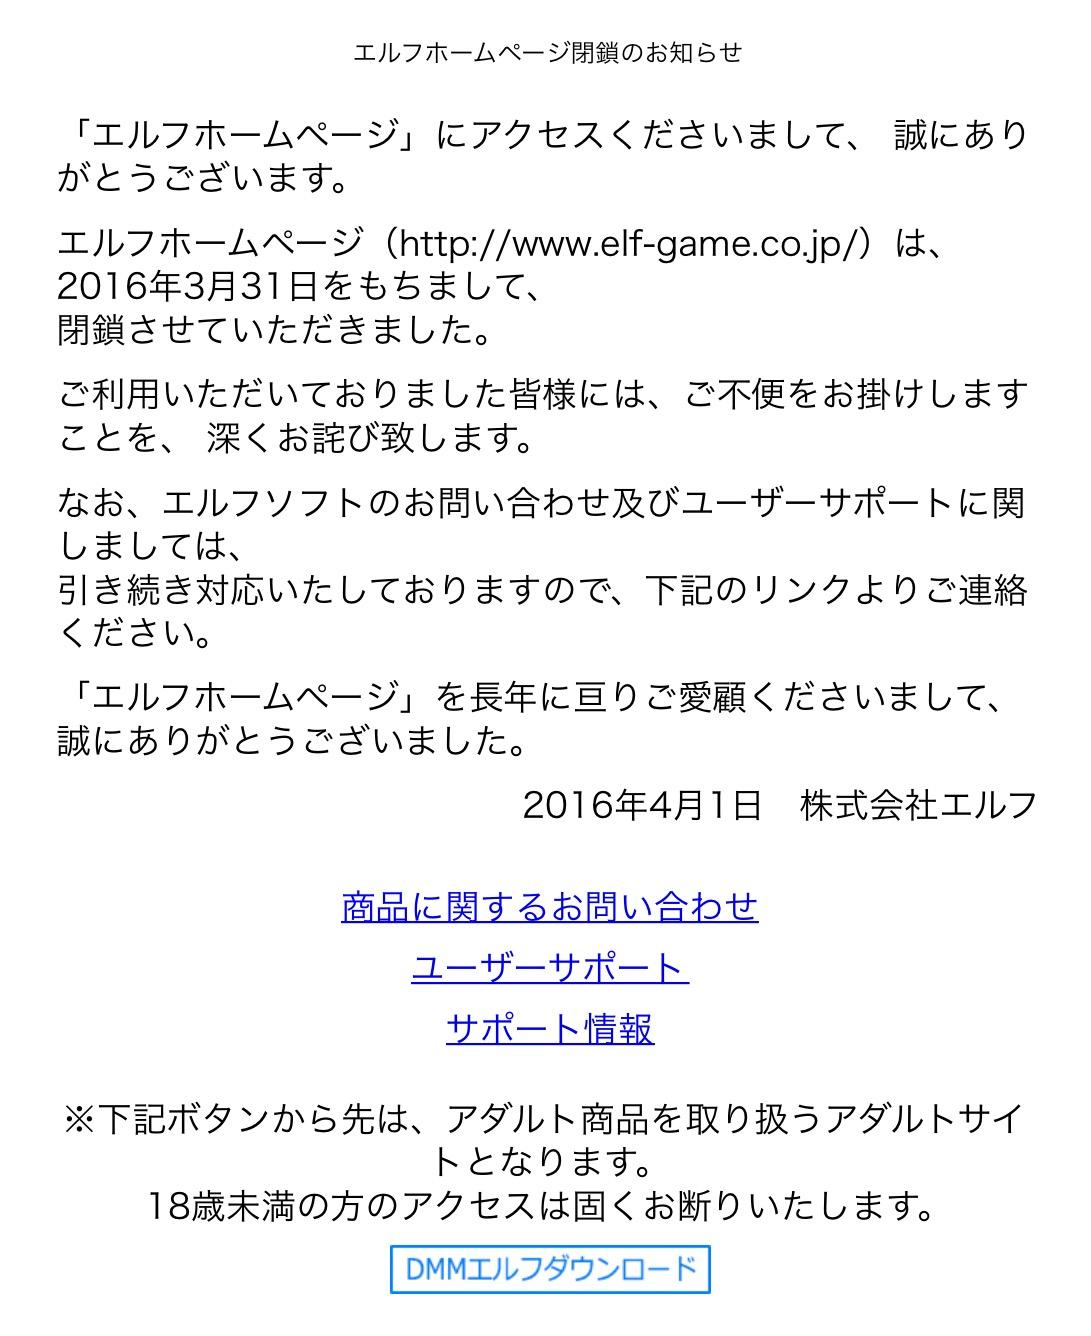 Elf's website is completely closed Is the role over with the release of the remake version "YU-NO" | Gogo Tsushin